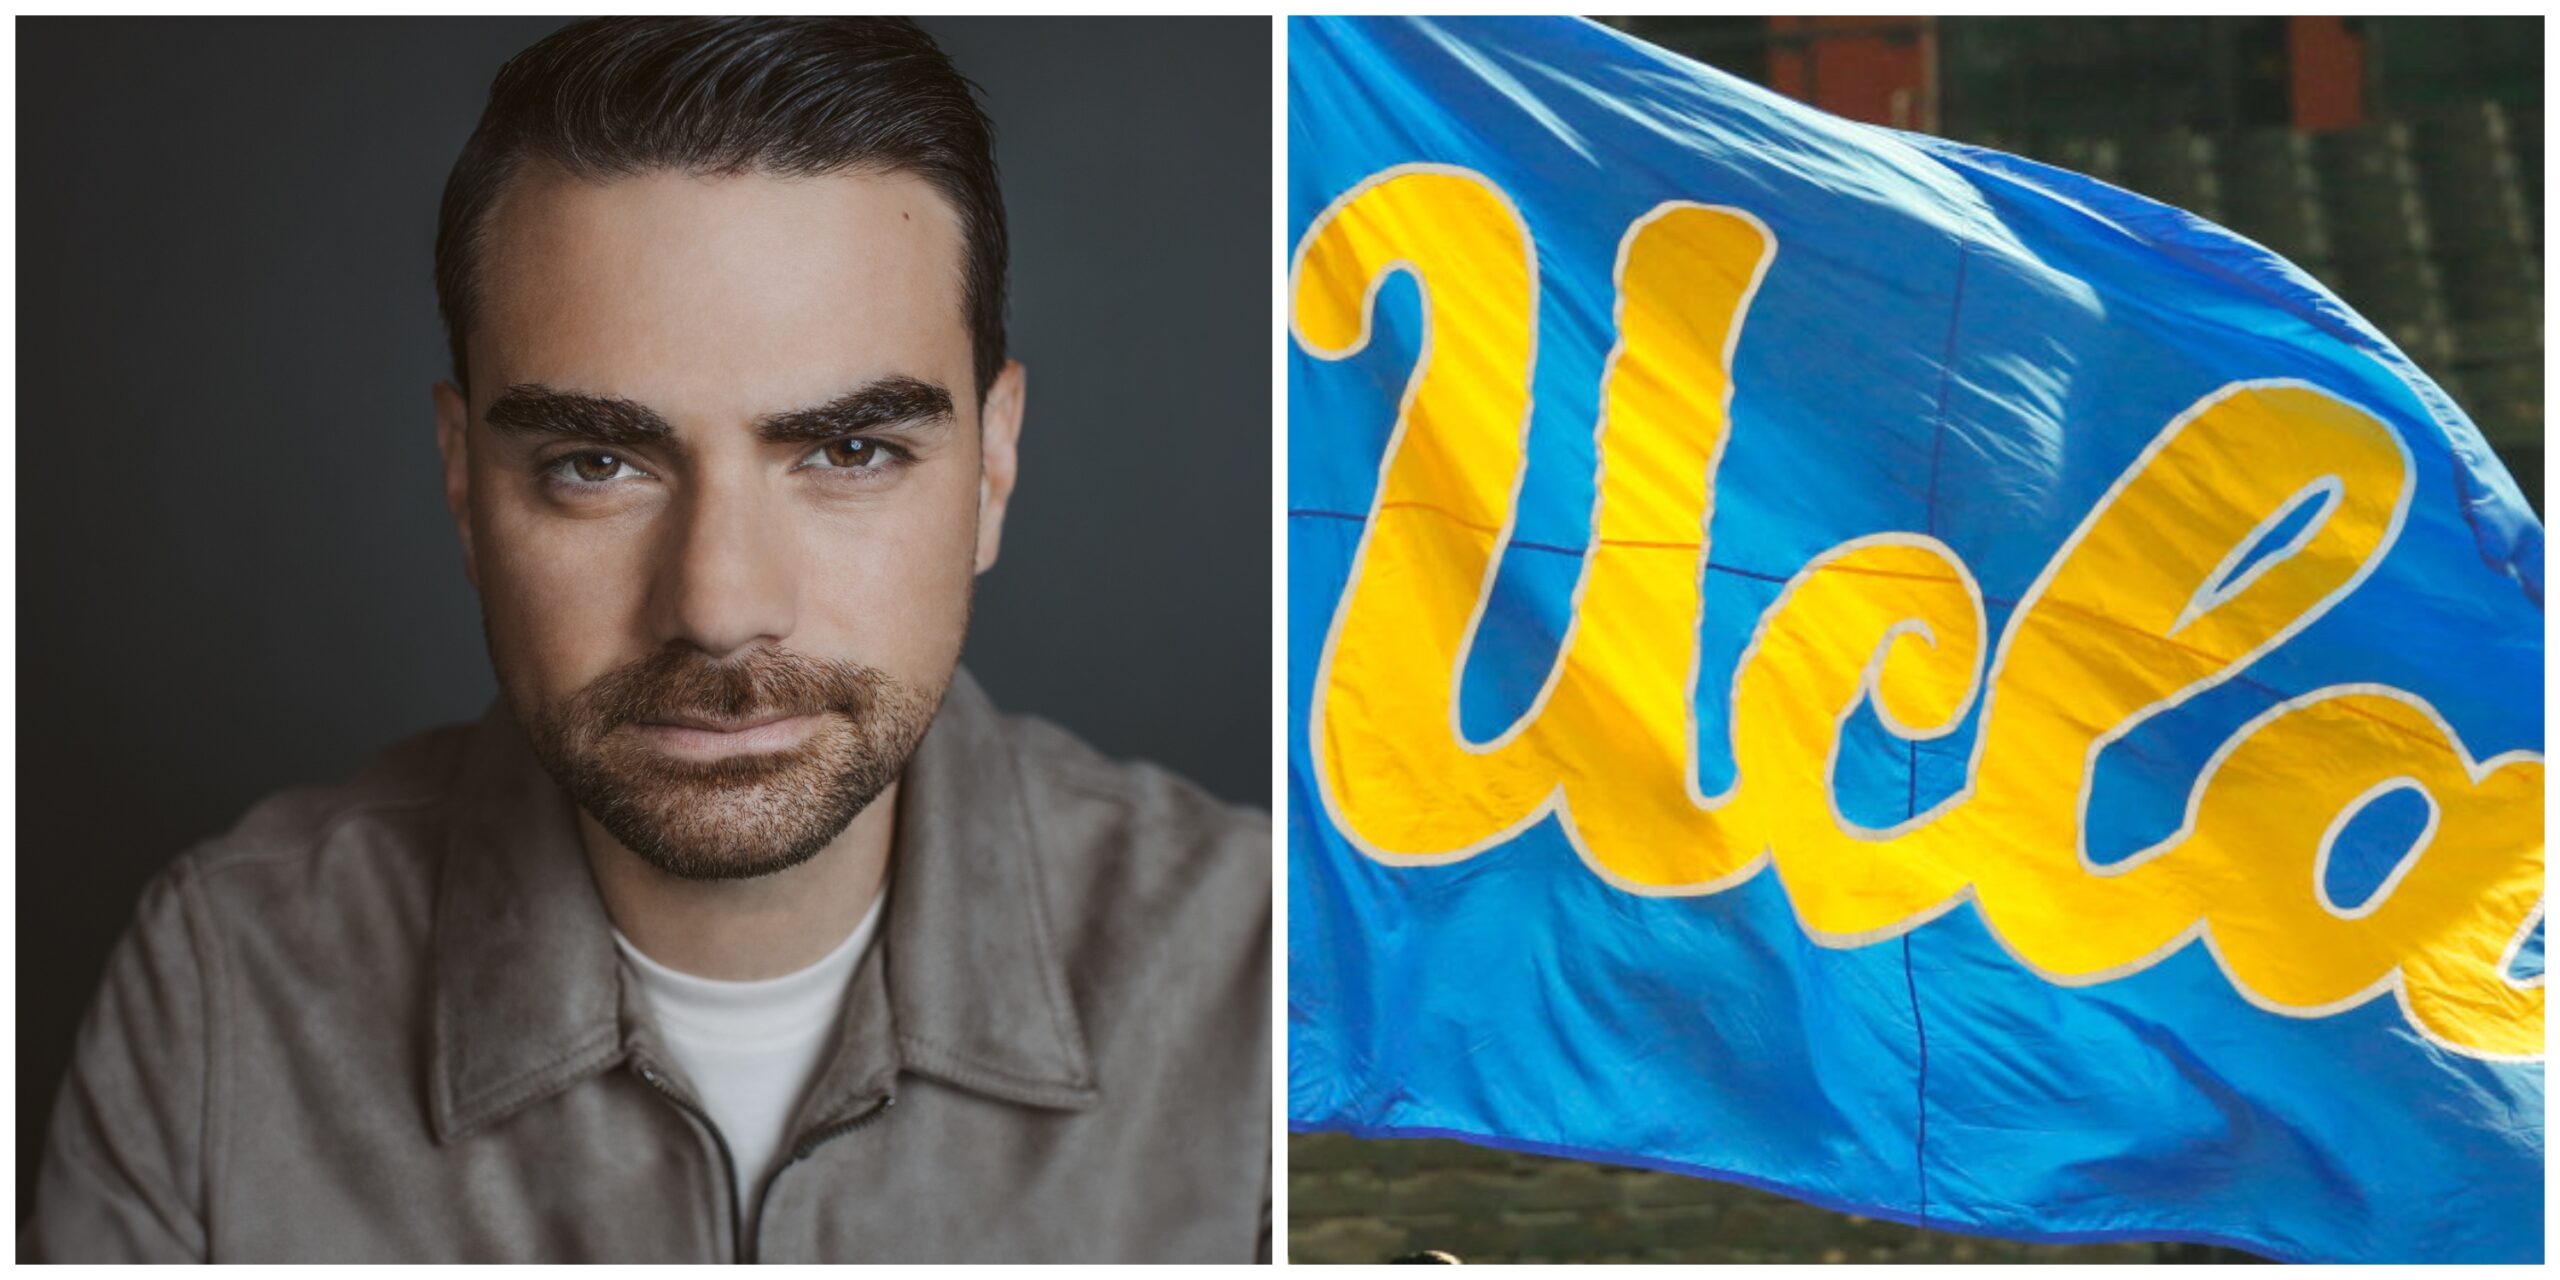 Ben Shapiro Reveals How UCLA Med Students Are Taught ‘Anti-White, Anti-American Hatred’